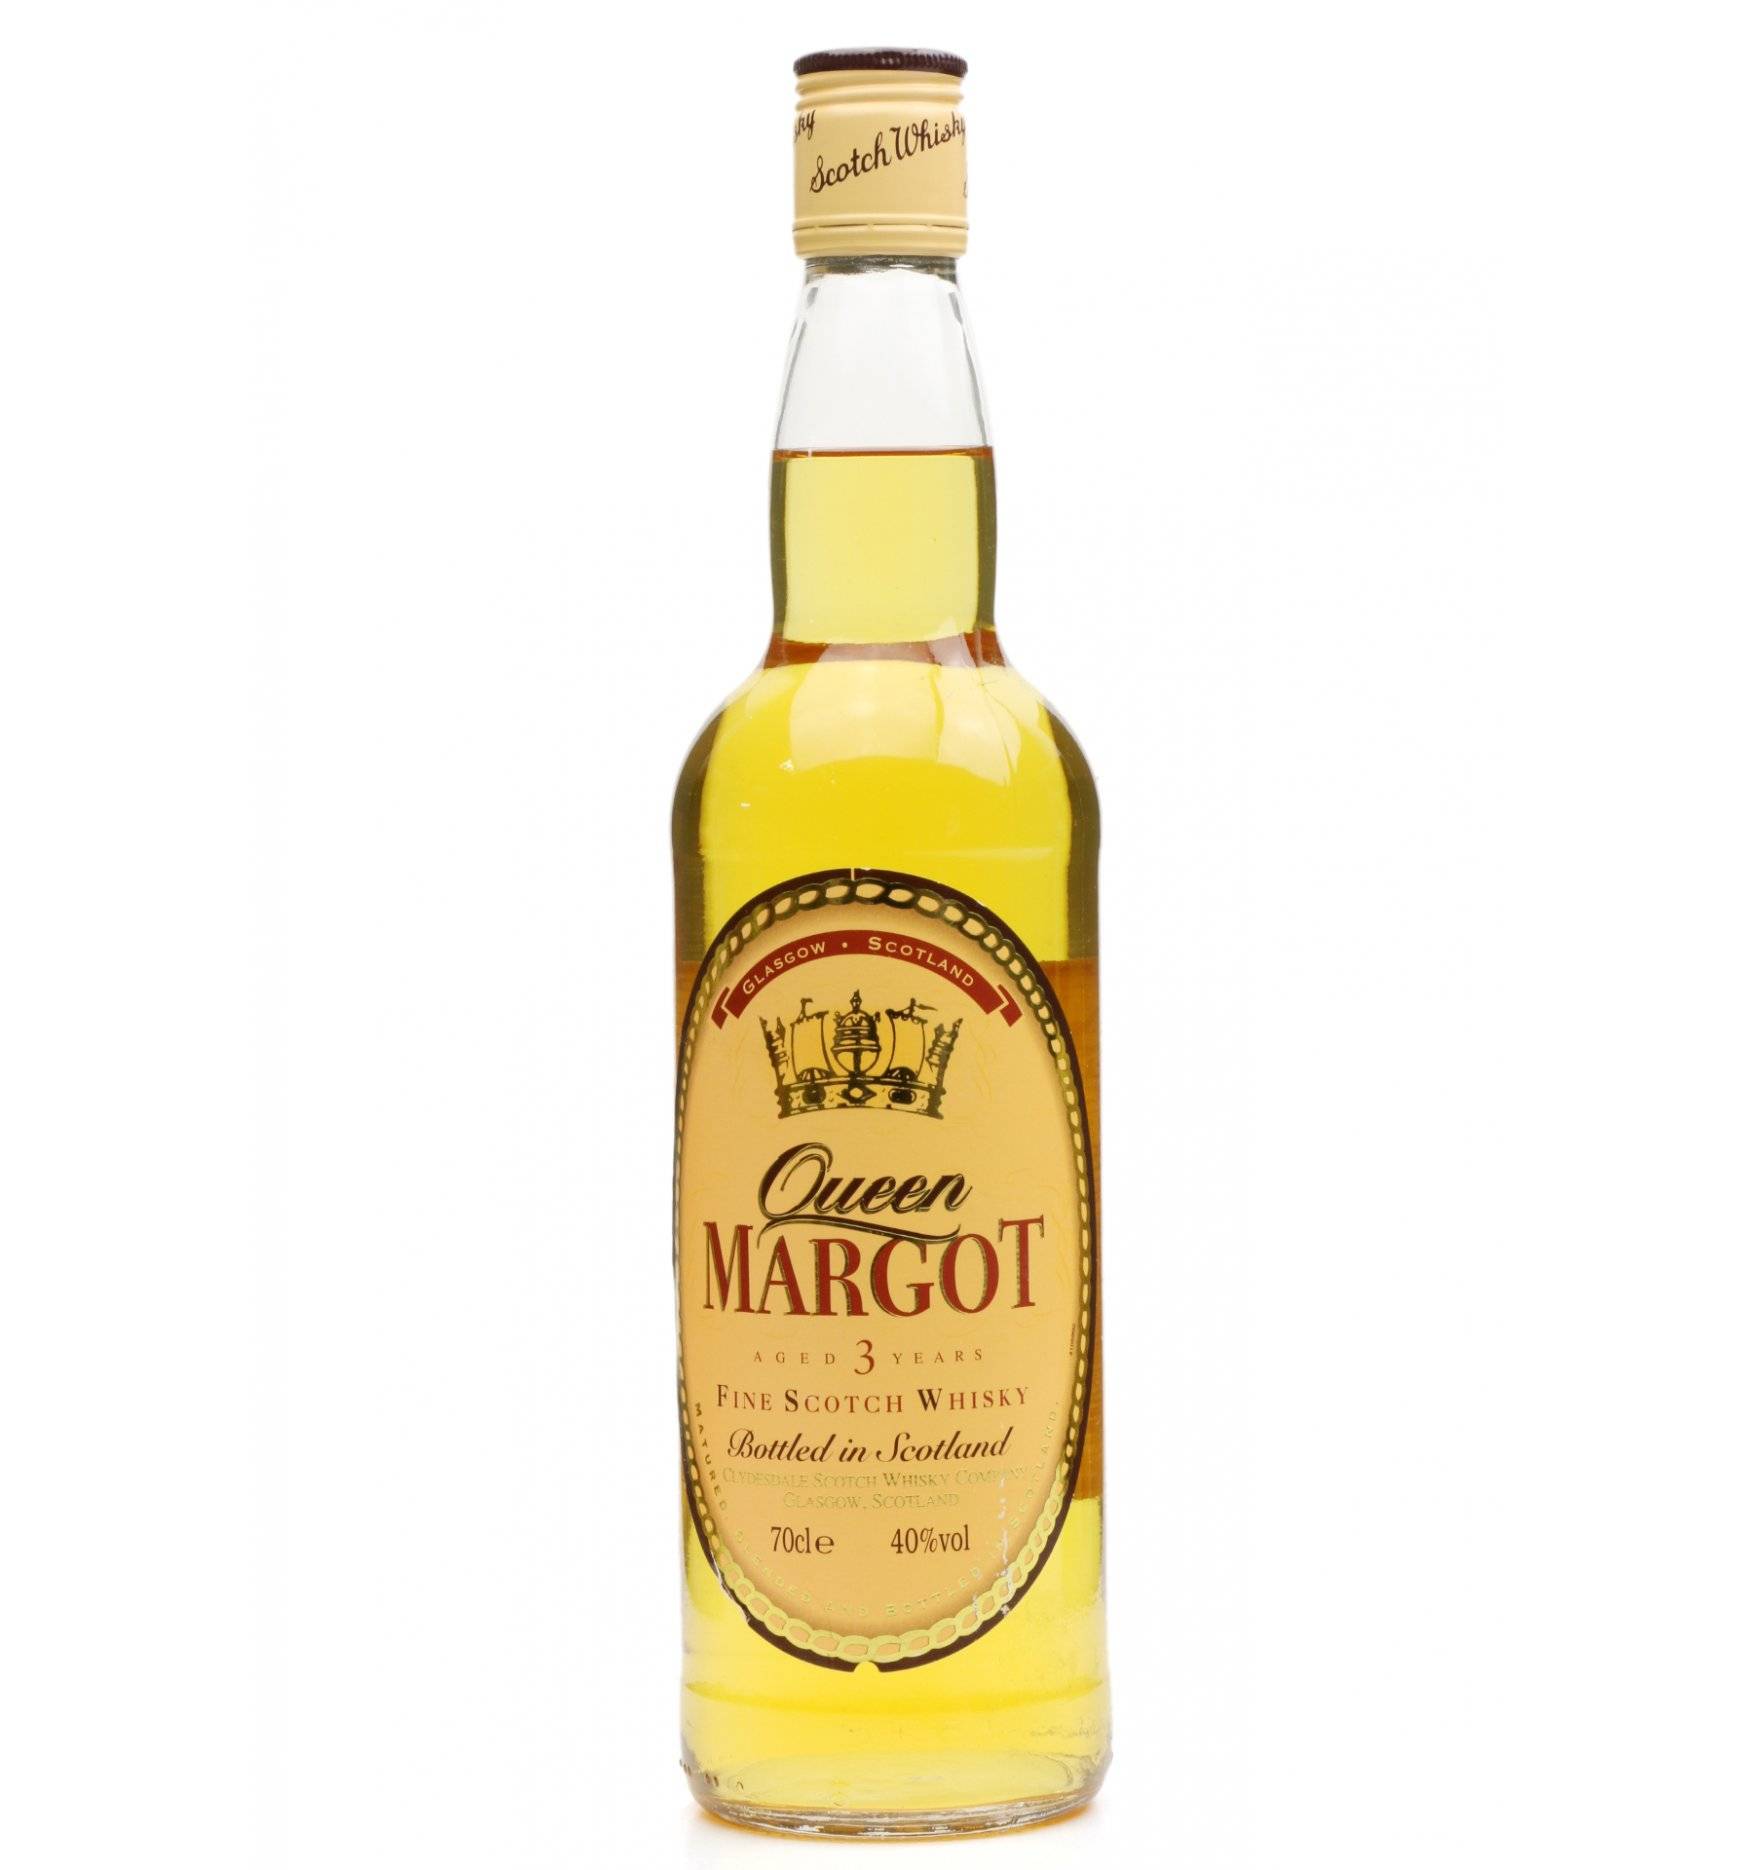 Queen Margot 3 Years Old - Clydesdale Scotch Whisky - Just Whisky Auctions